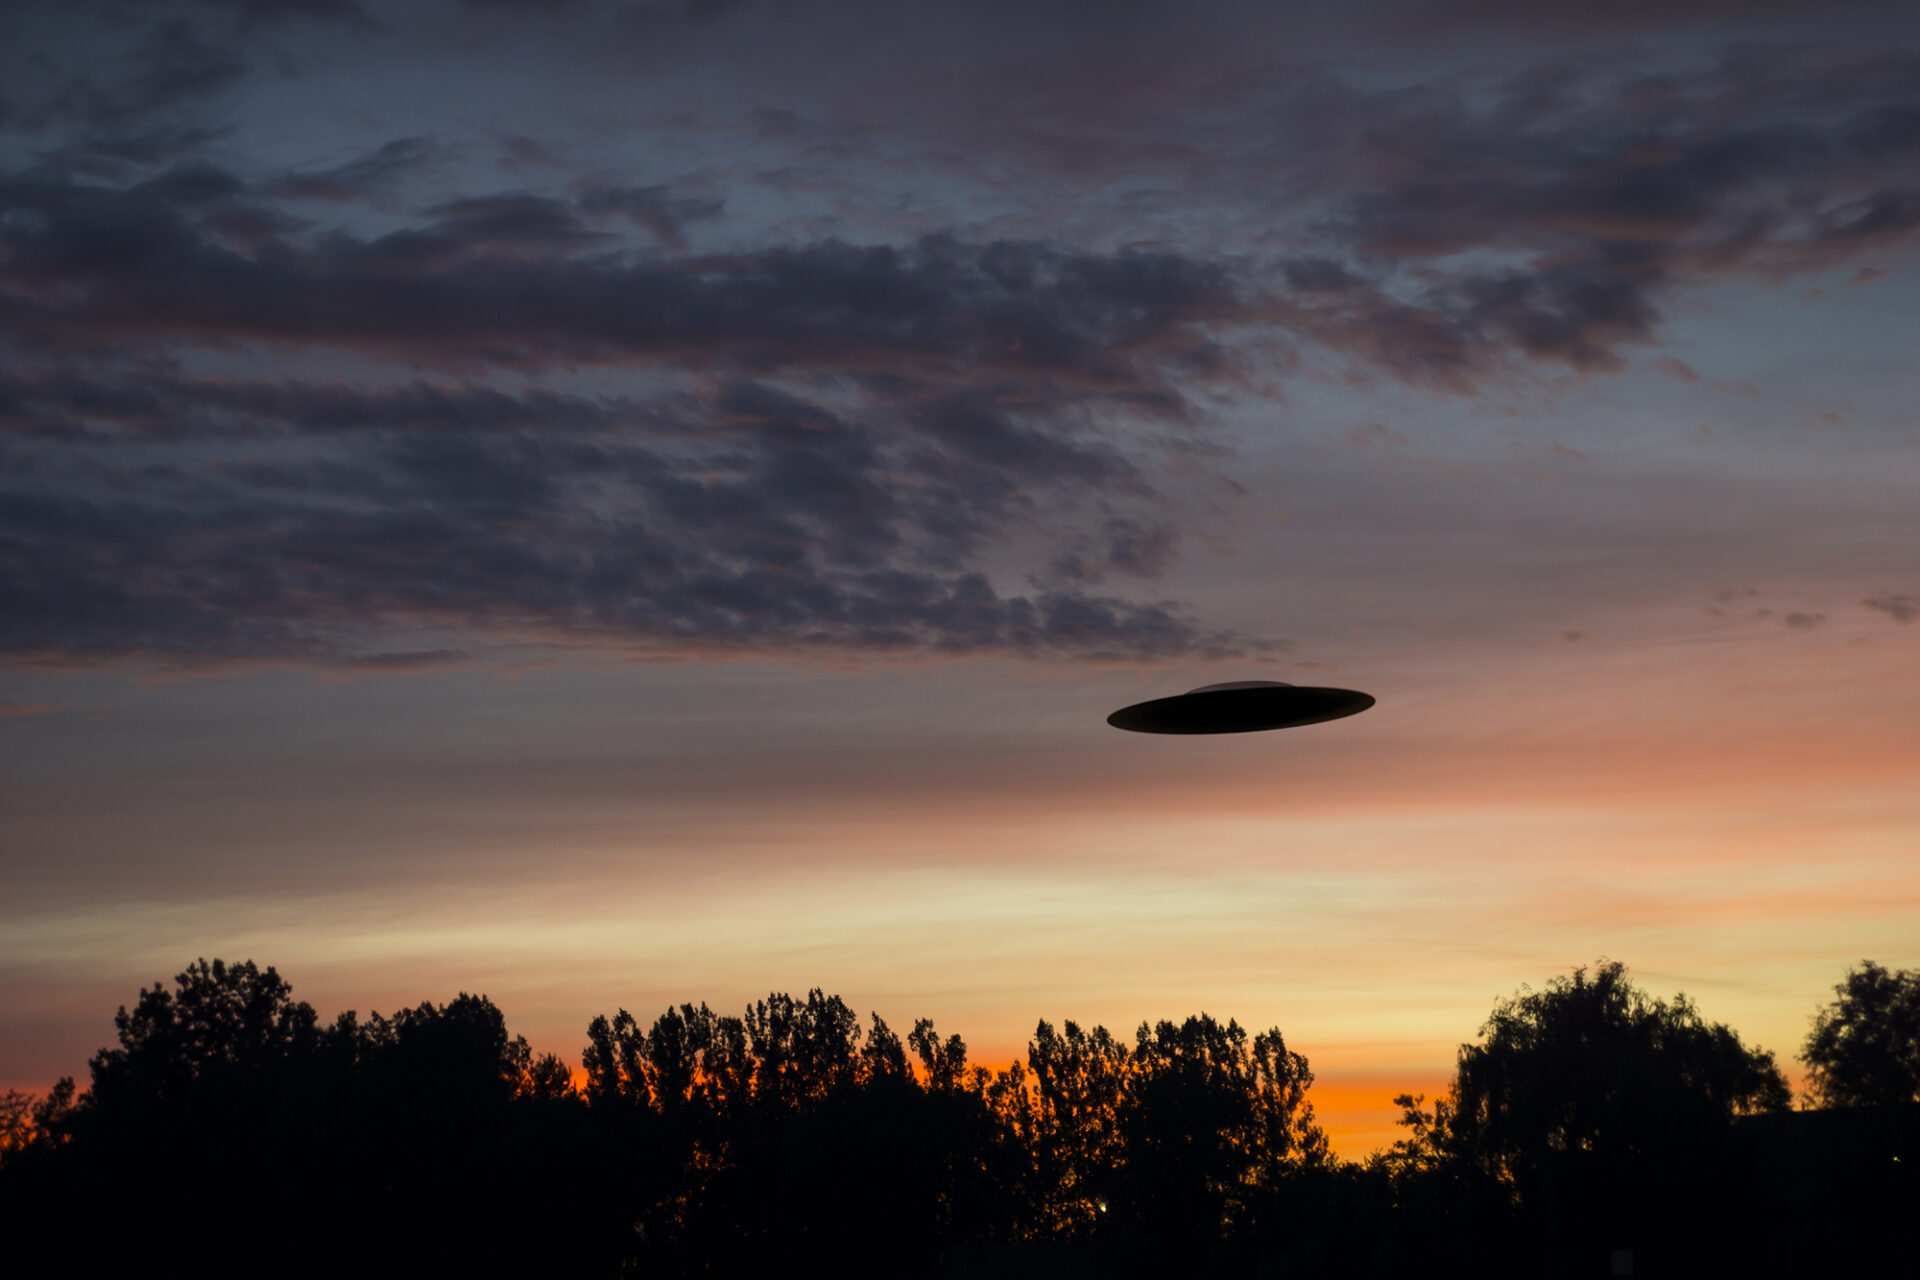 UFO spotted over NY airport: Report